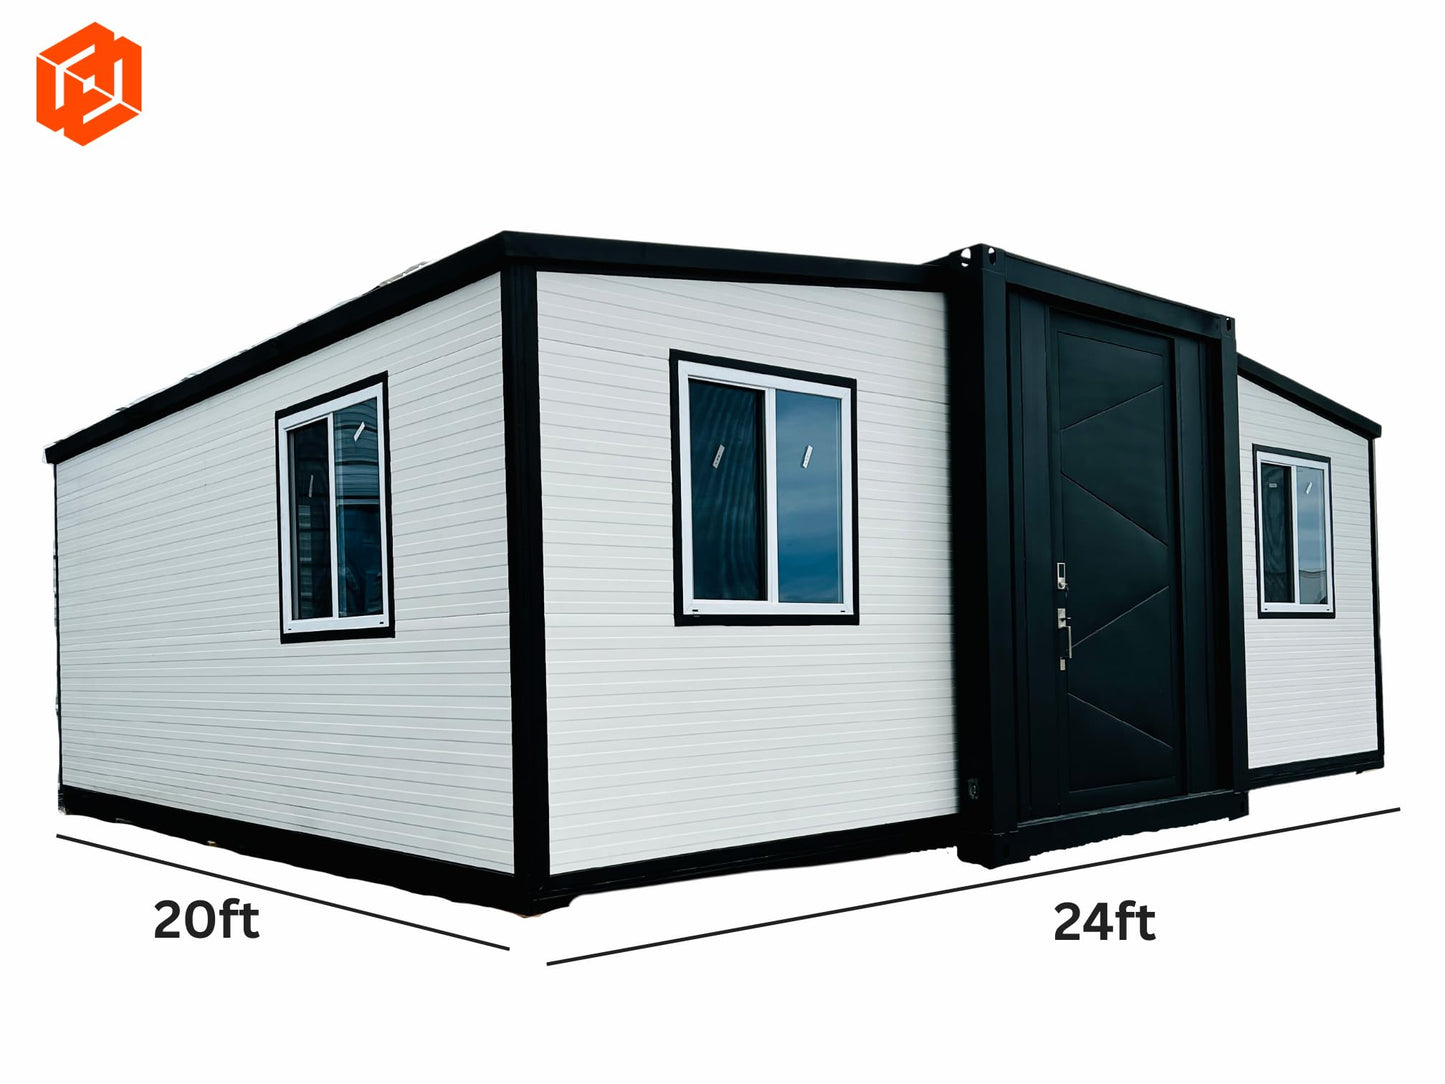 MADBOX Manarola: Expandable Modern Container Home - Sustainable Living Redefined